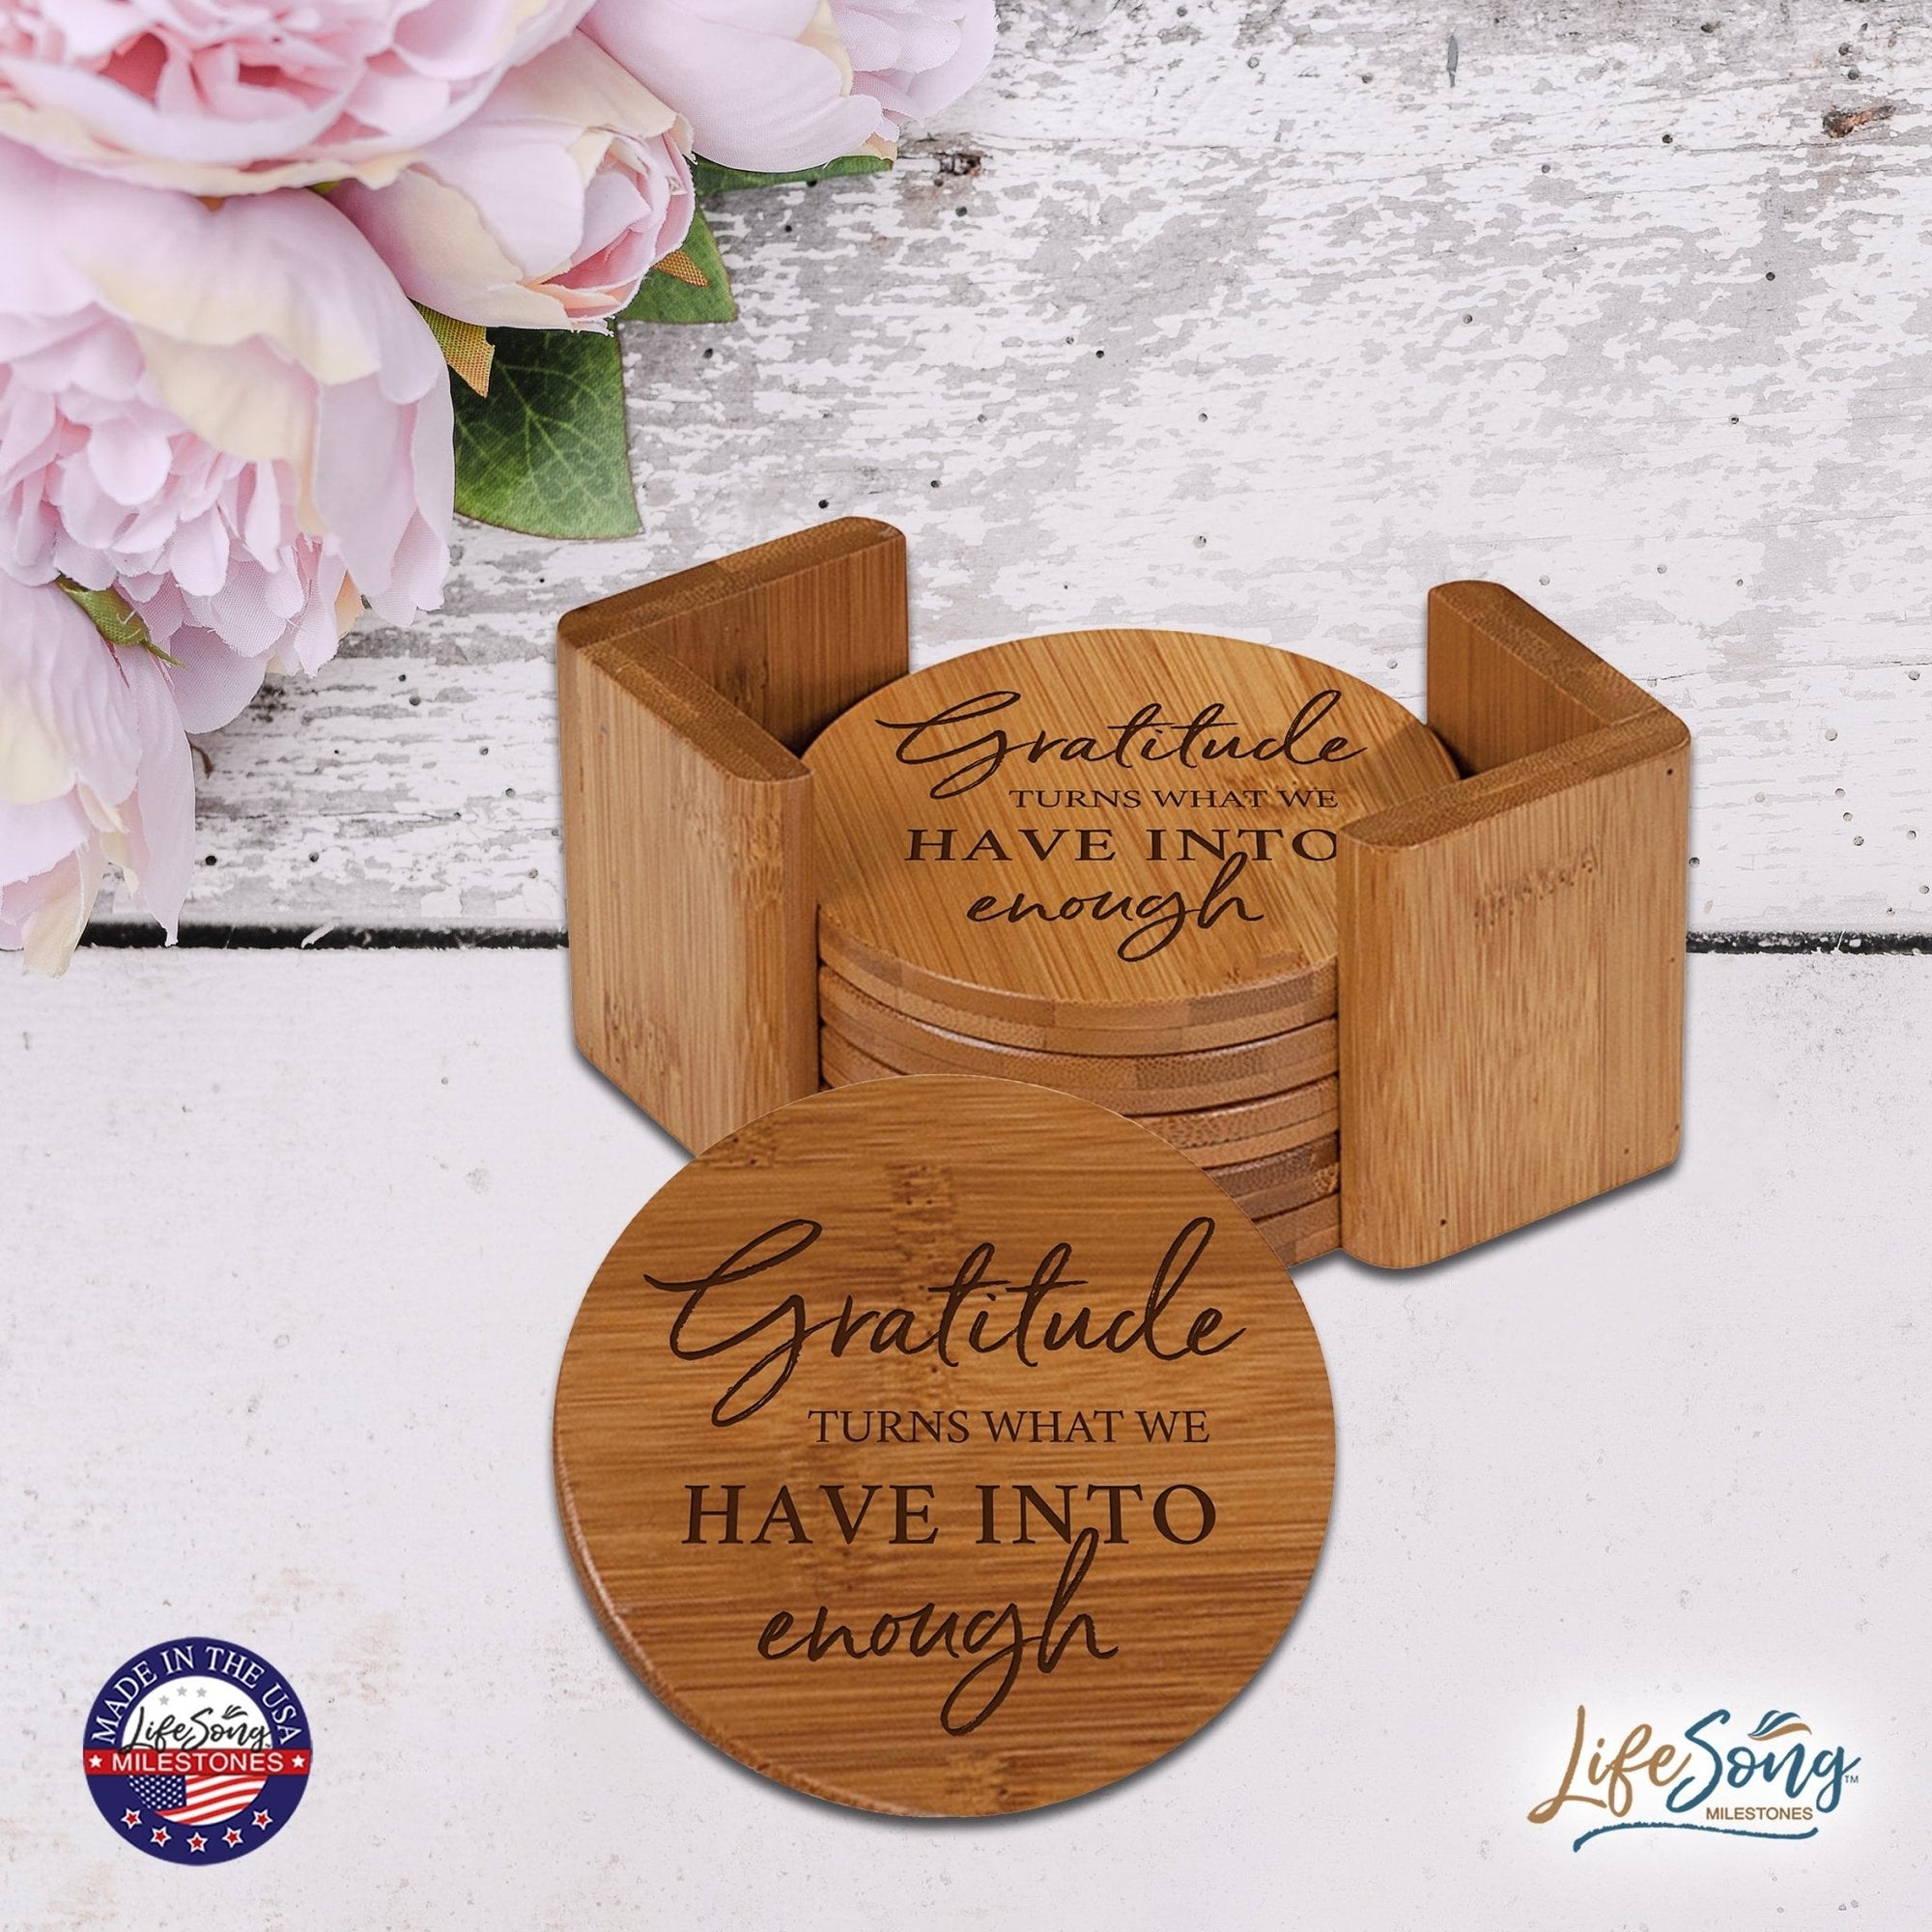 Modern Family Home 6pc Bamboo Coaster Set With Holder 4.5x4.5 – Gratitude Turns What - LifeSong Milestones